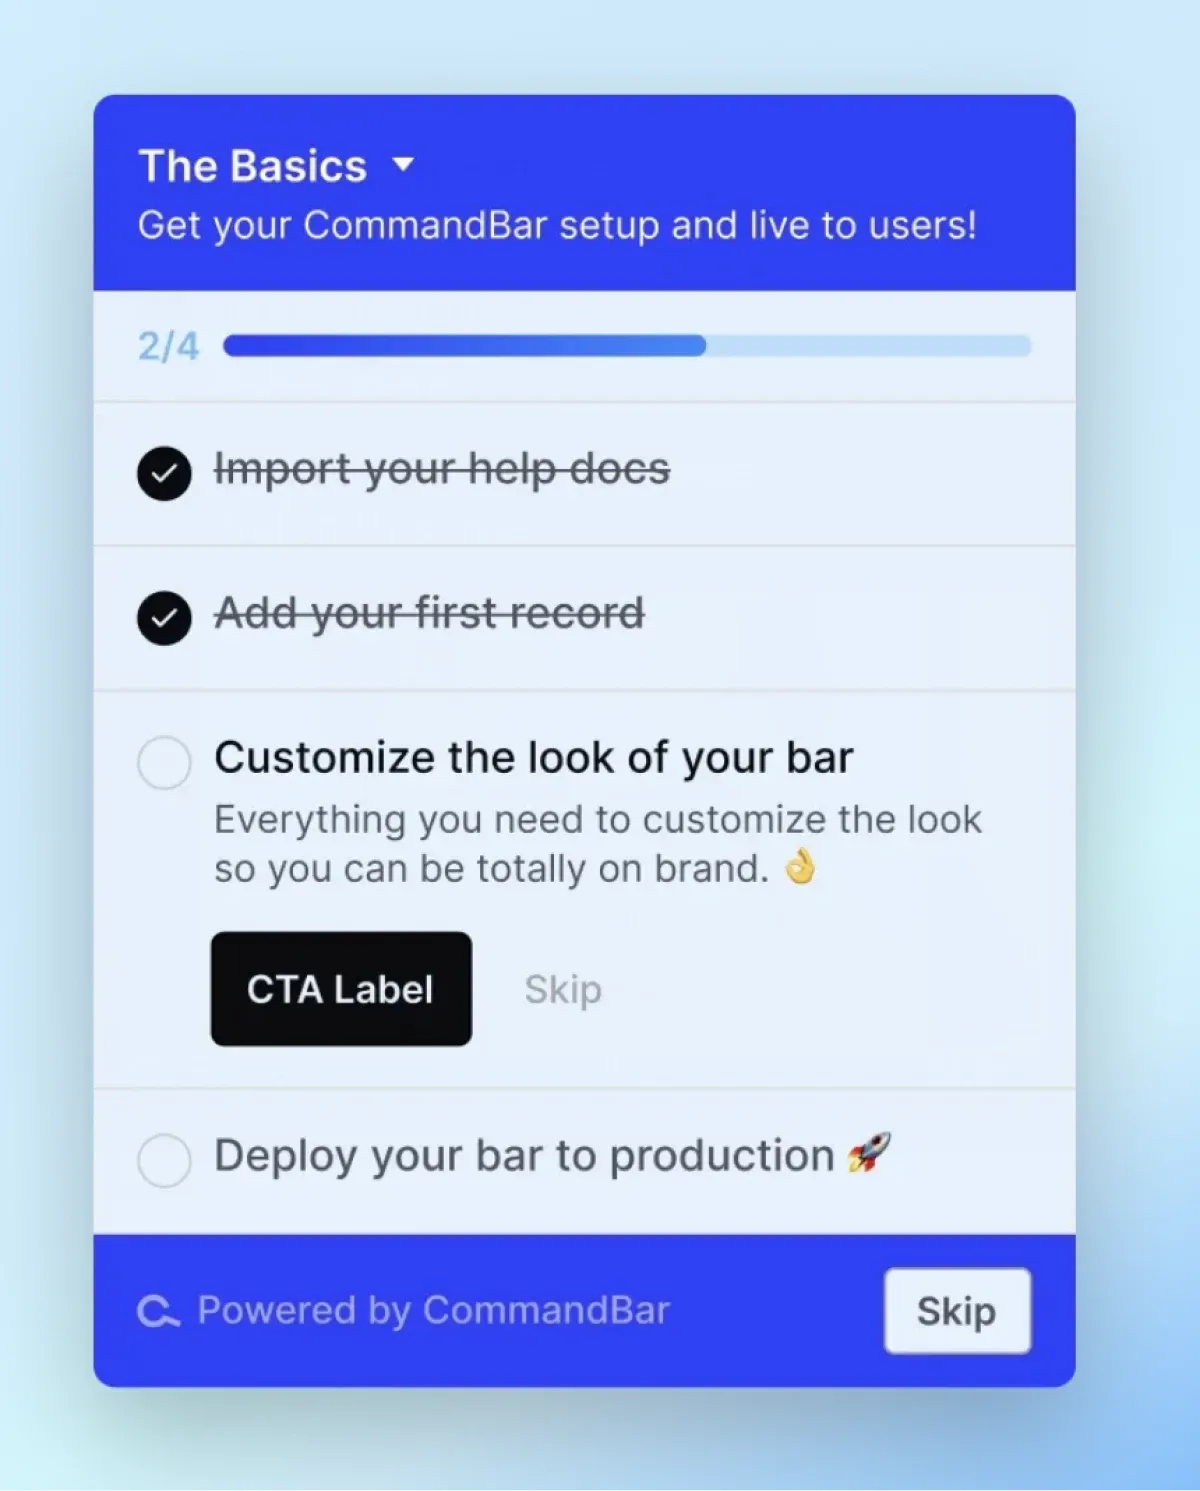 An example of a checklist made with CommandBar for a first-time user